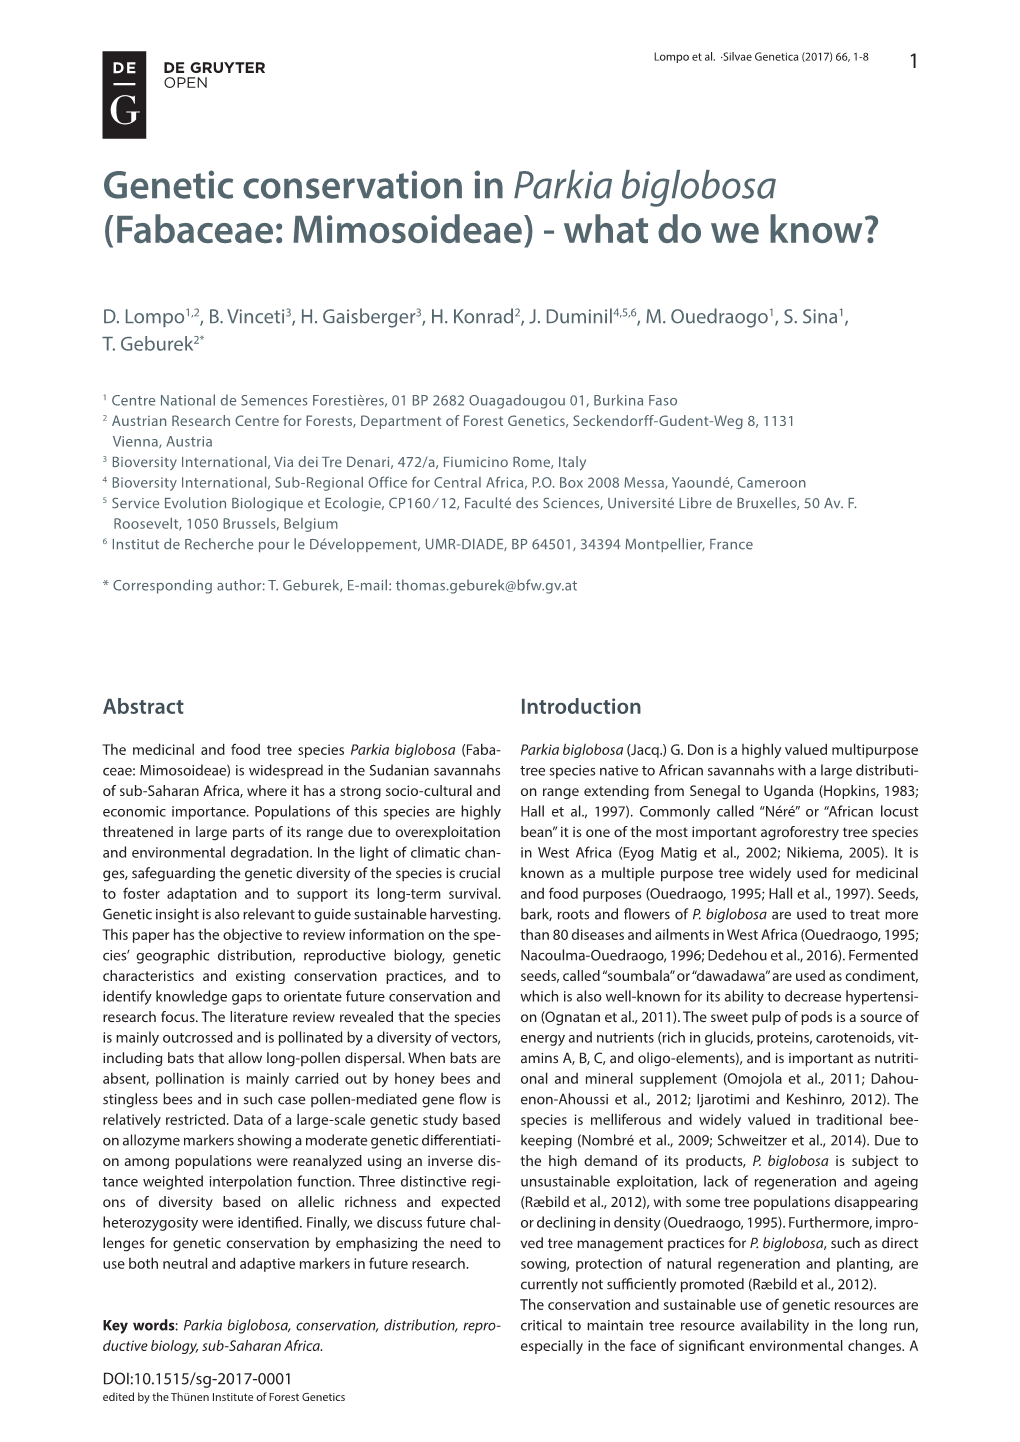 Genetic Conservation in Parkia Biglobosa (Fabaceae: Mimosoideae) - What Do We Know?